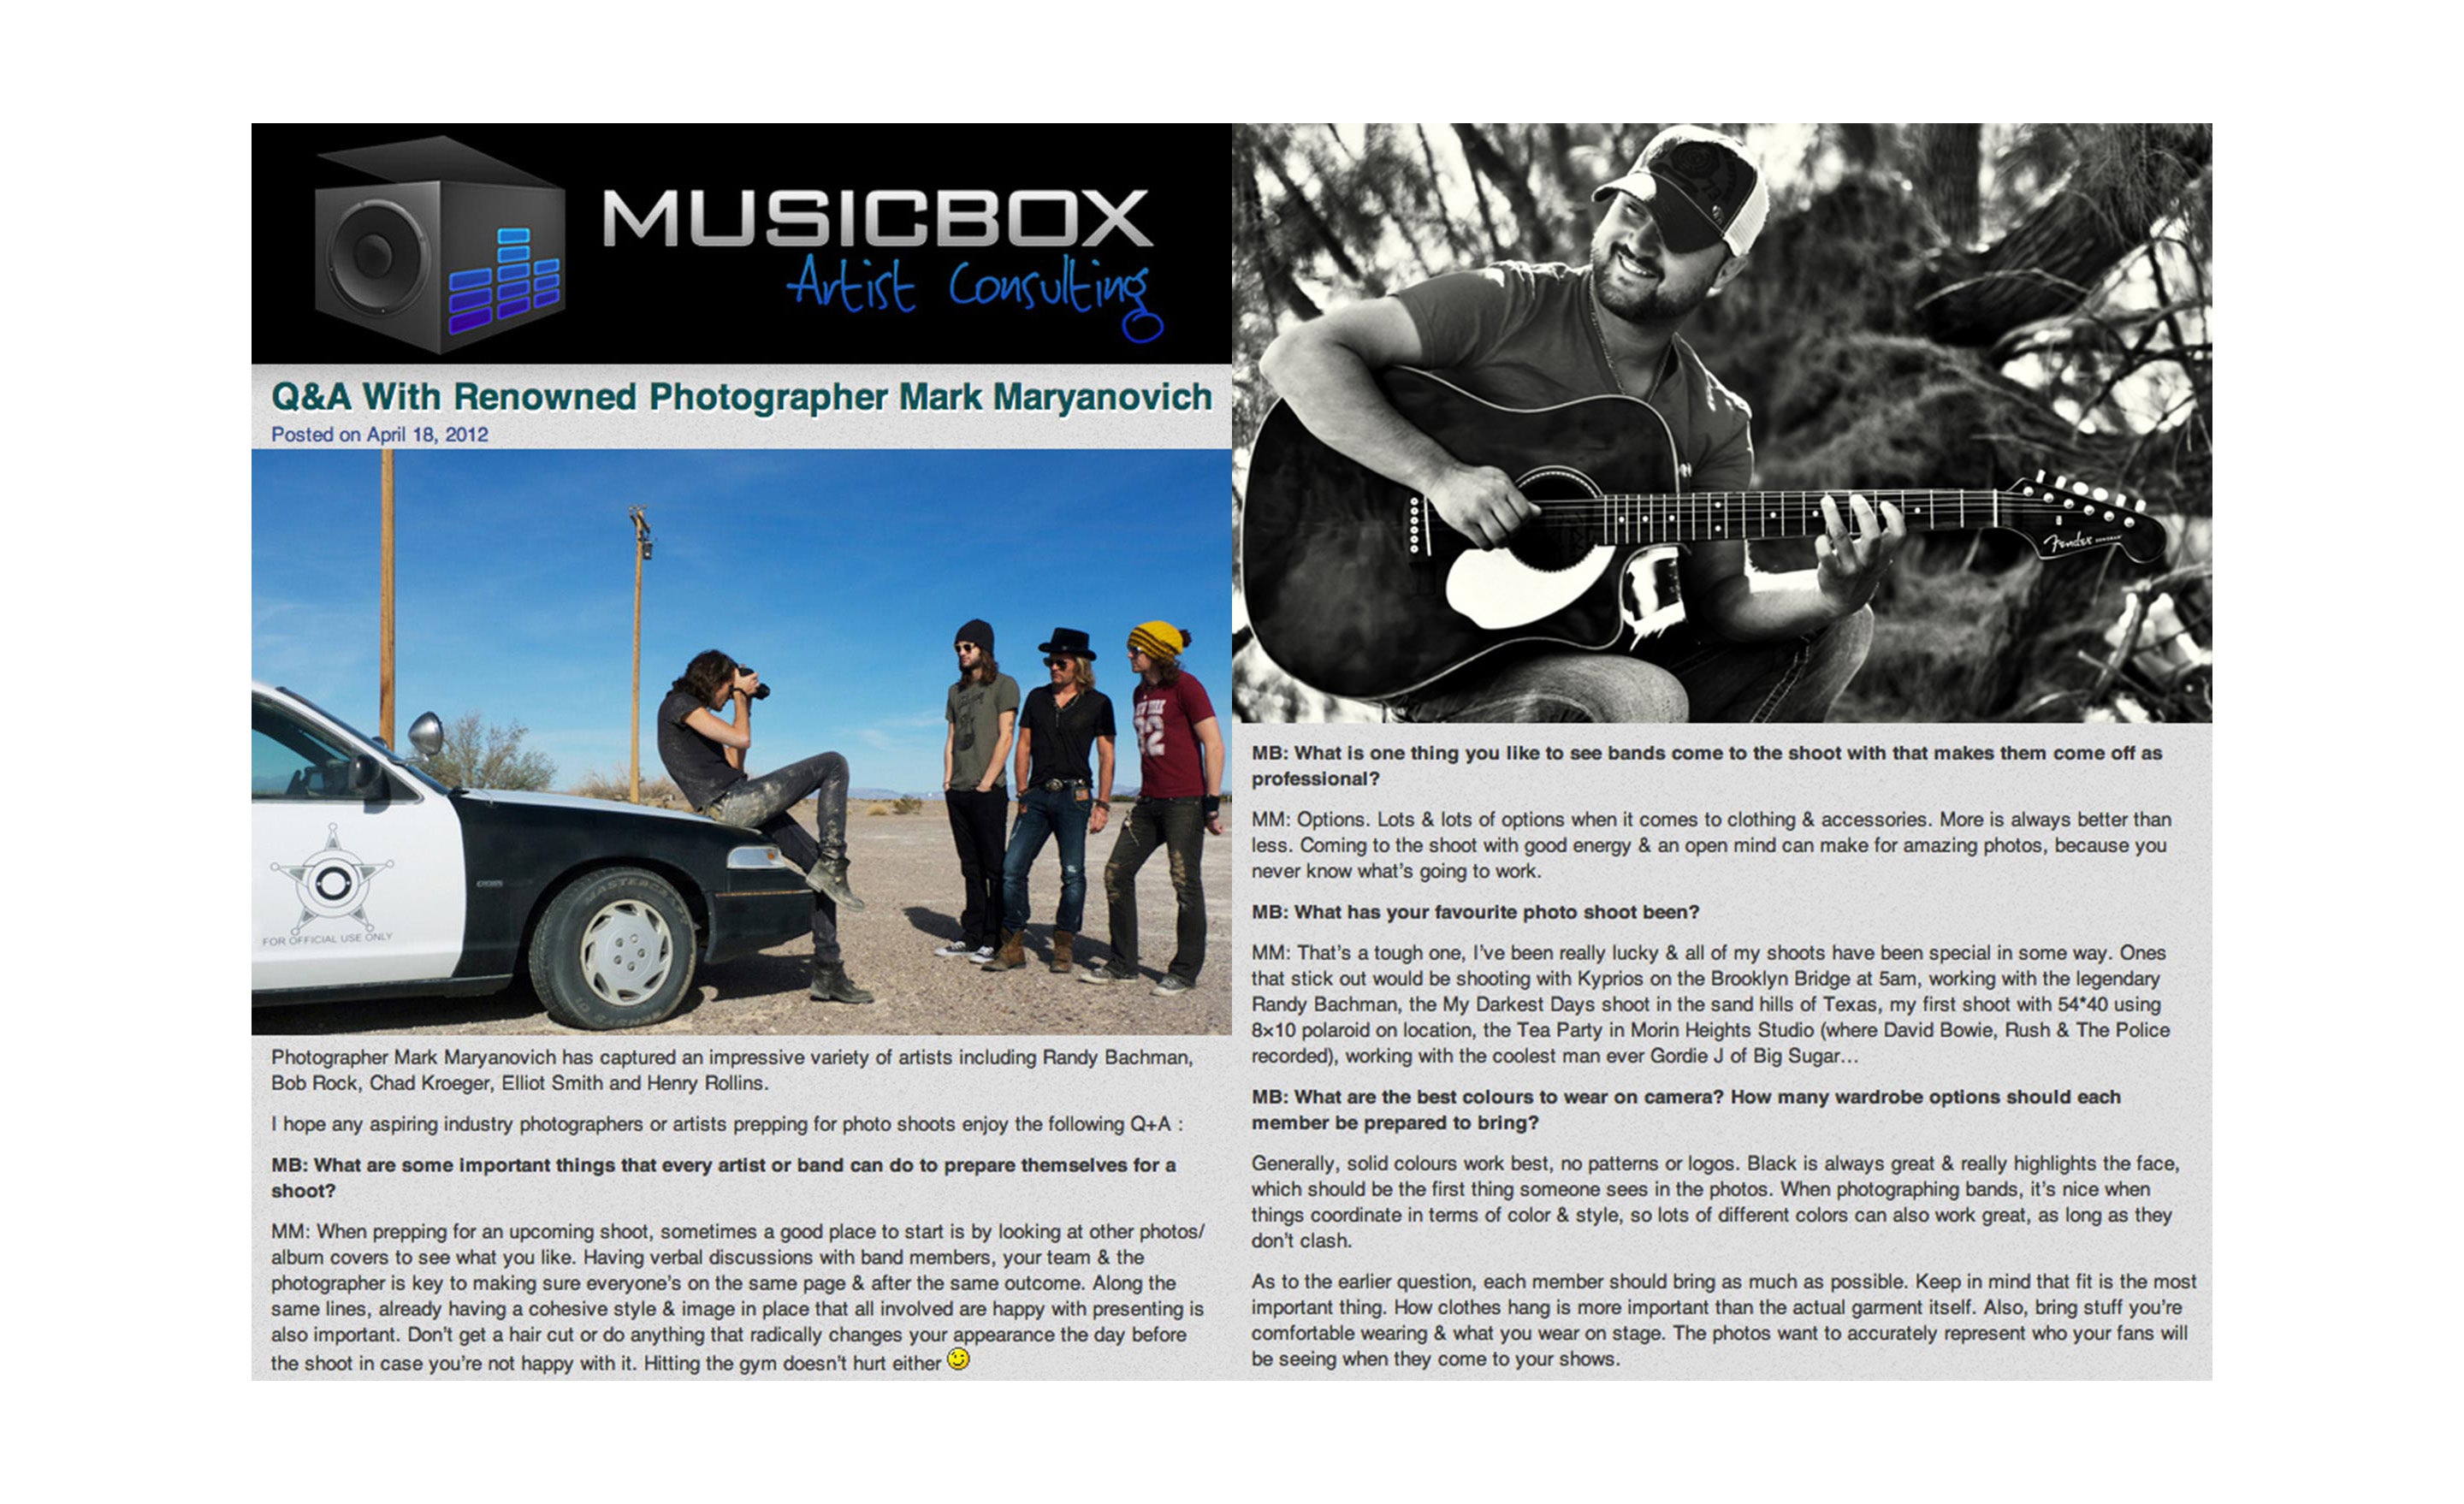 LA Photographer Mark Maryanovich Interview Publication Musicbox Artist Consulting page 1 behind the scenes photo Mark taking portrait of three band members while sitting on hood of car with black and white portrait country musician strumming guitar while smiling in front of tree in black and white on opposite side